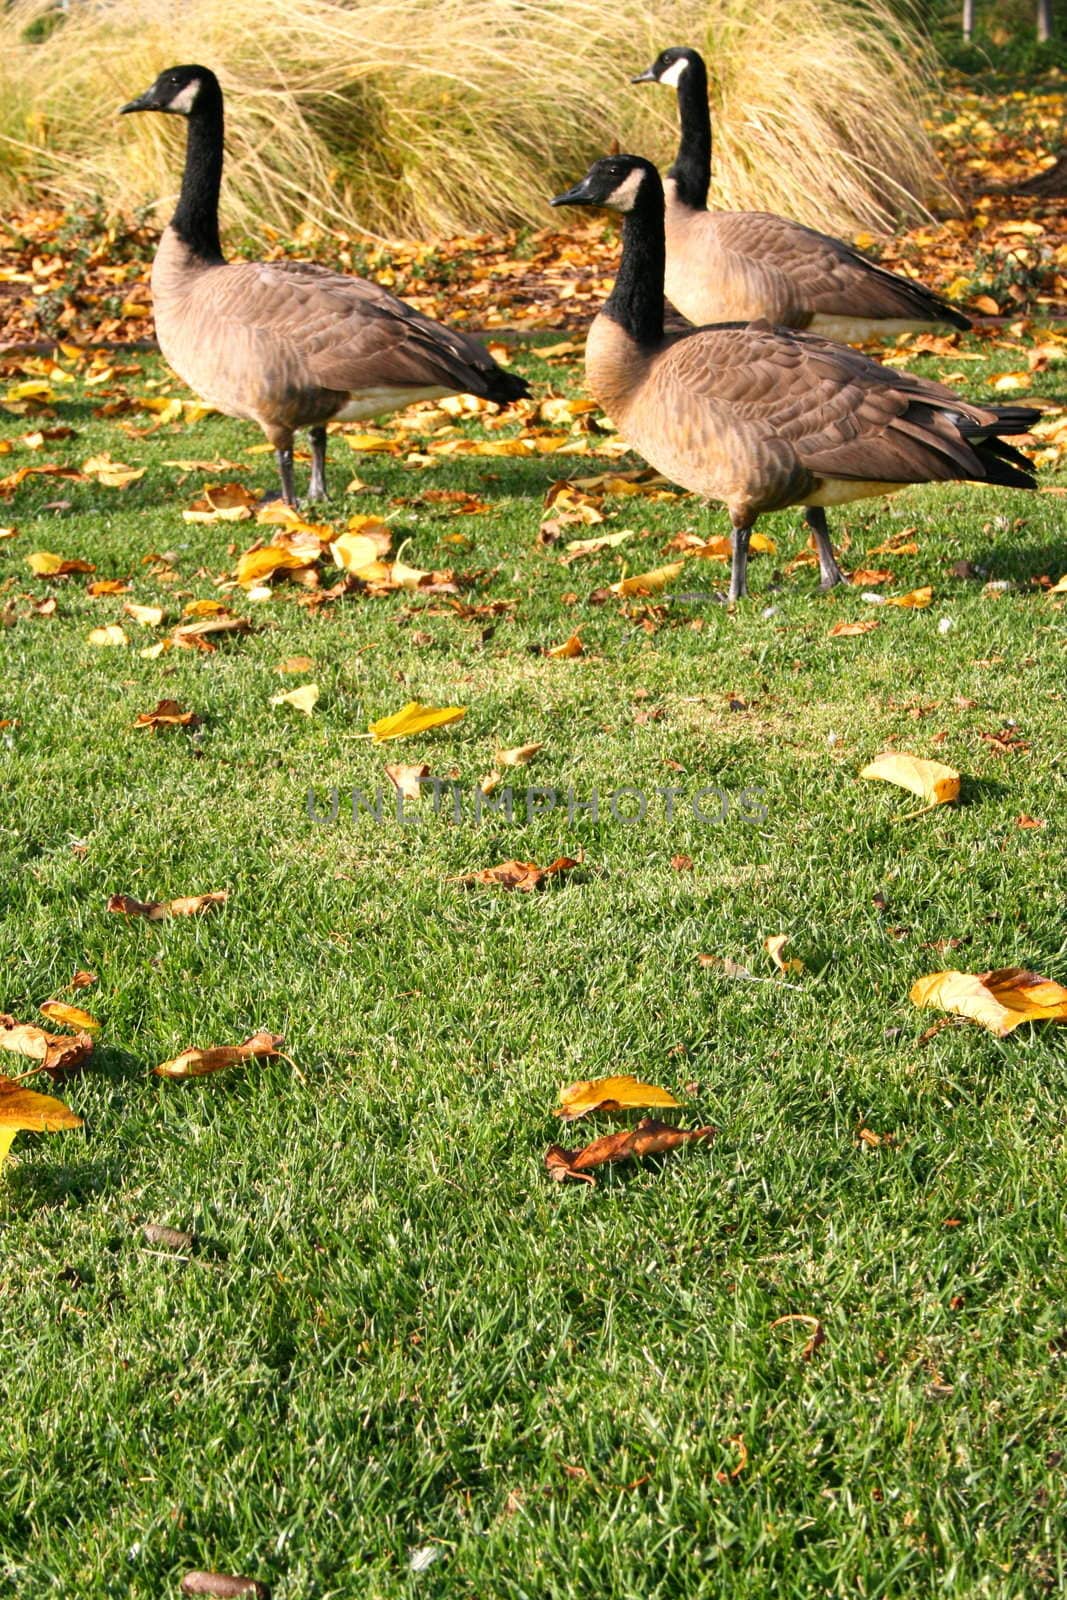 Three canadian geese resting in a park.
